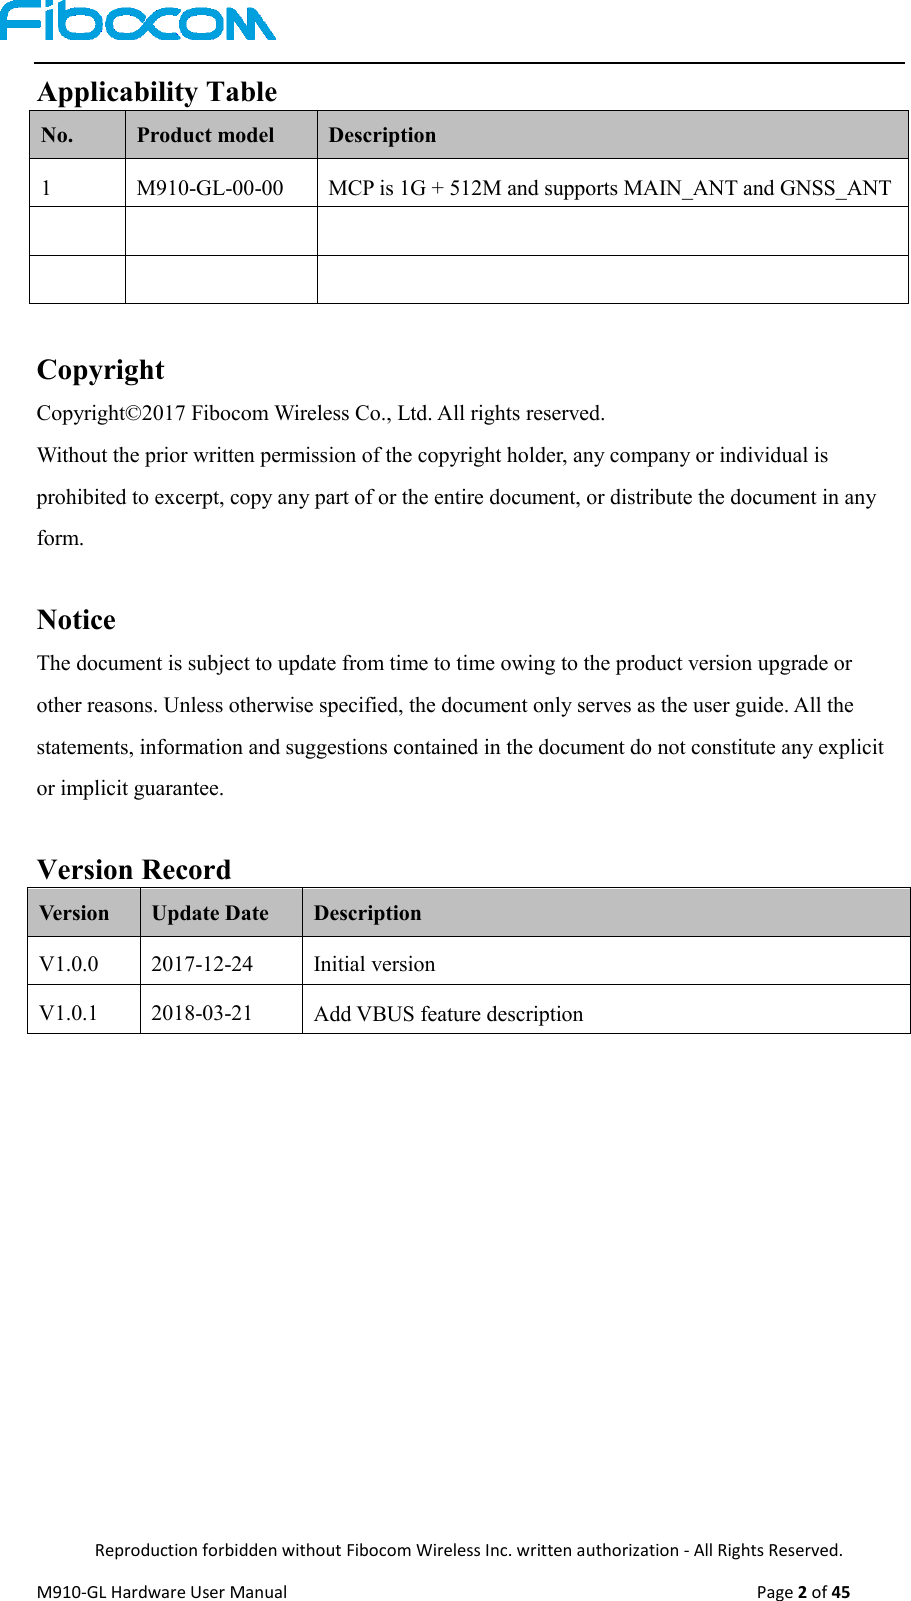  Reproduction forbidden without Fibocom Wireless Inc. written authorization - All Rights Reserved. M910-GL Hardware User Manual                                                                                                  Page 2 of 45  Applicability Table No. Product model Description 1 M910-GL-00-00 MCP is 1G + 512M and supports MAIN_ANT and GNSS_ANT        Copyright   Copyright©2017 Fibocom Wireless Co., Ltd. All rights reserved.   Without the prior written permission of the copyright holder, any company or individual is prohibited to excerpt, copy any part of or the entire document, or distribute the document in any form.  Notice The document is subject to update from time to time owing to the product version upgrade or other reasons. Unless otherwise specified, the document only serves as the user guide. All the statements, information and suggestions contained in the document do not constitute any explicit or implicit guarantee.  Version Record Version Update Date Description V1.0.0 2017-12-24 Initial version V1.0.1 2018-03-21 Add VBUS feature description 